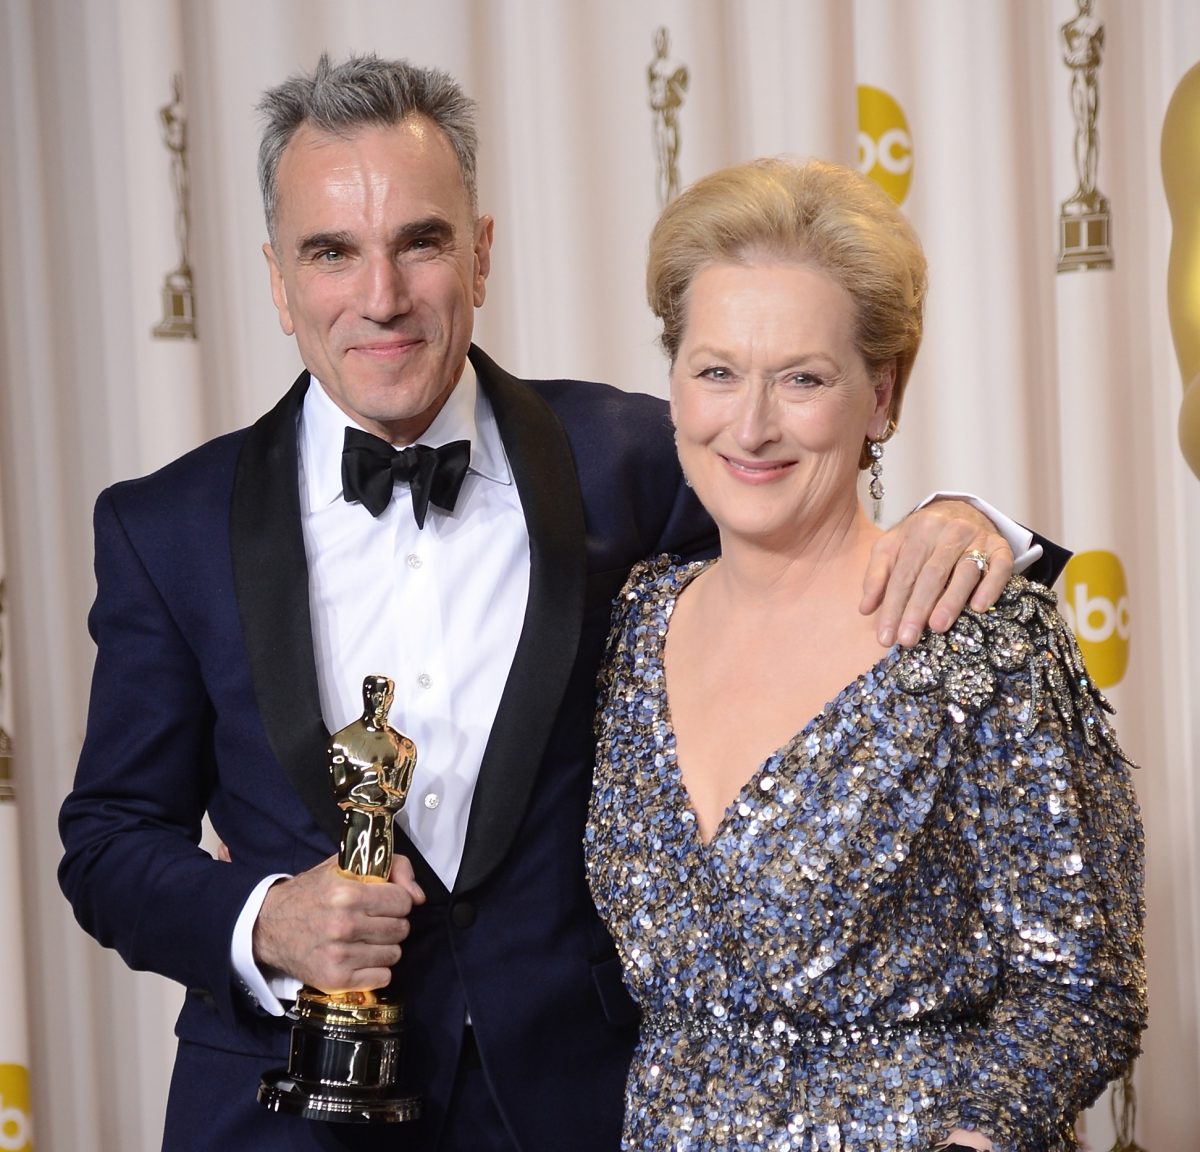 Two of the greatest character actors of our era: Daniel Day-Lewis, winner of the Best Actor award for "Lincoln," and presenter Meryl Streep pose in the press room during the Oscars held at Loews Hollywood Hotel in Hollywood, Calif., on Feb. 24, 2013. (Jason Merritt/Getty Images)